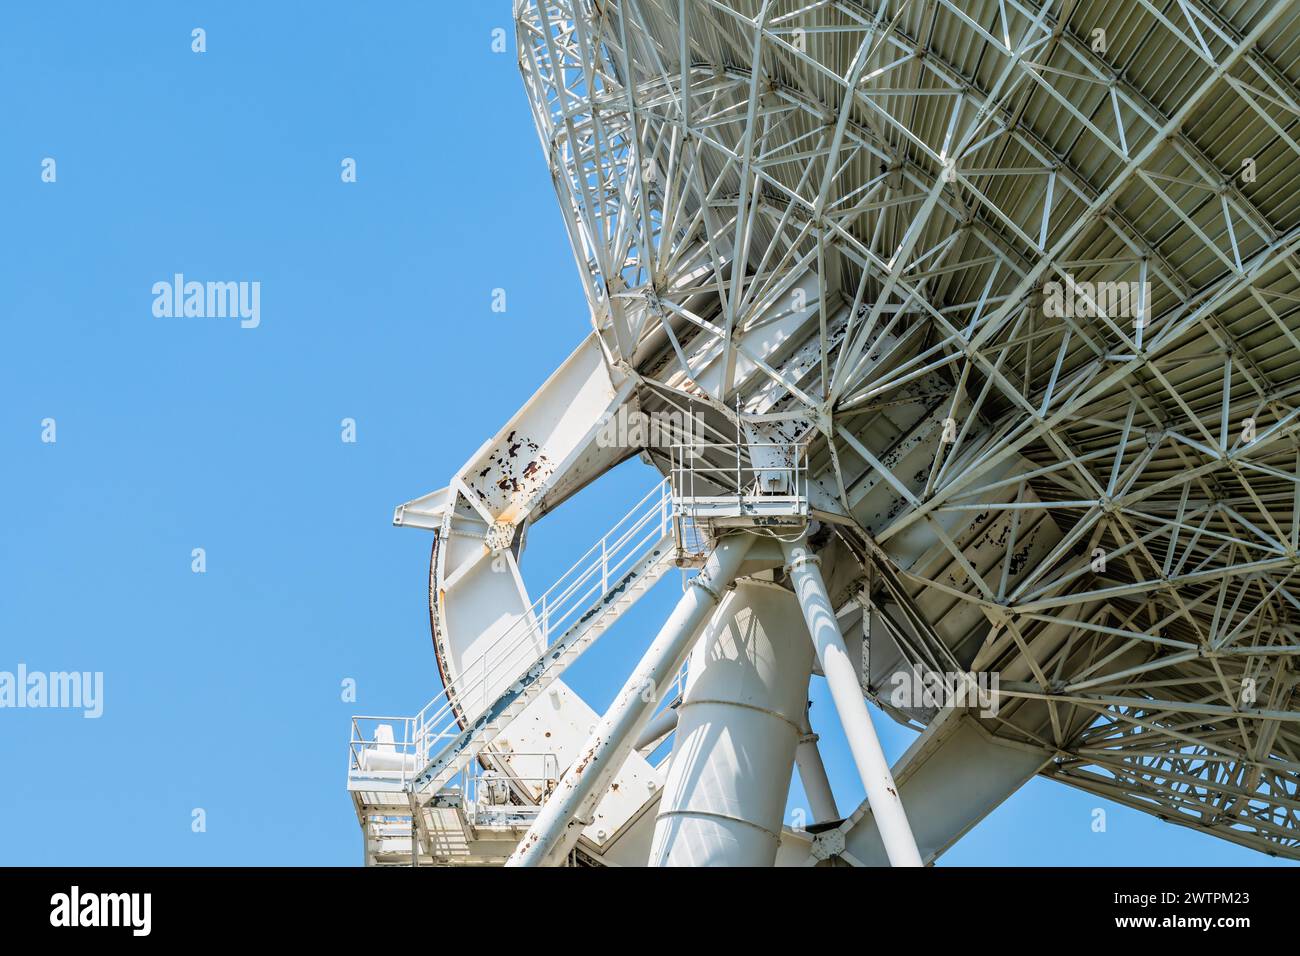 Massive satellite dish dominating the view against a clear sky, in South Korea Stock Photo